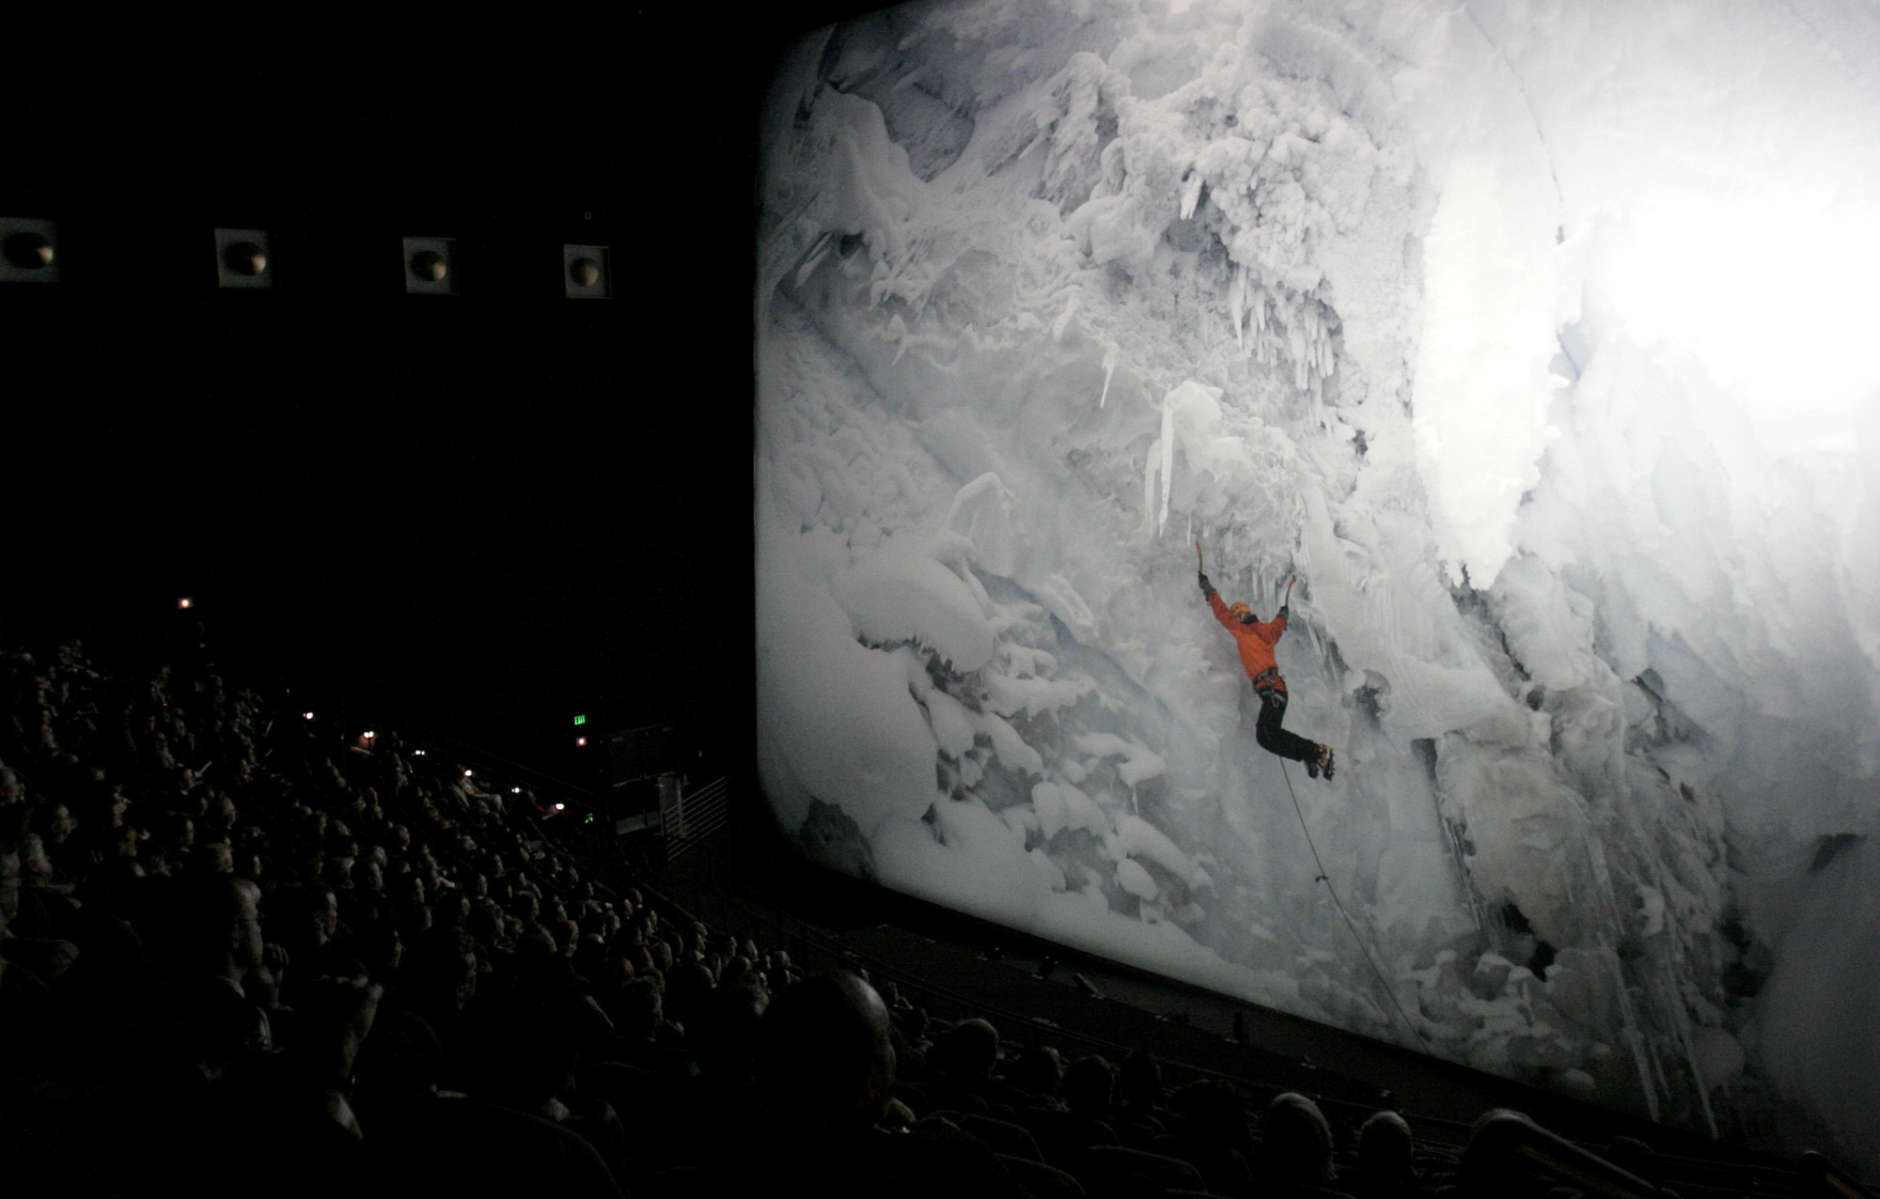 The audience watches the world premier of the Imax film "The Alps" at the Smithsonian's National Museum of Natural History in Washington, Wednesday, March 7, 2007. The film documents John Harlin III's ascent of the Eiger in the Swiss Alps 40 years after his father died on the same mountain. (AP Photo/Caleb Jones)